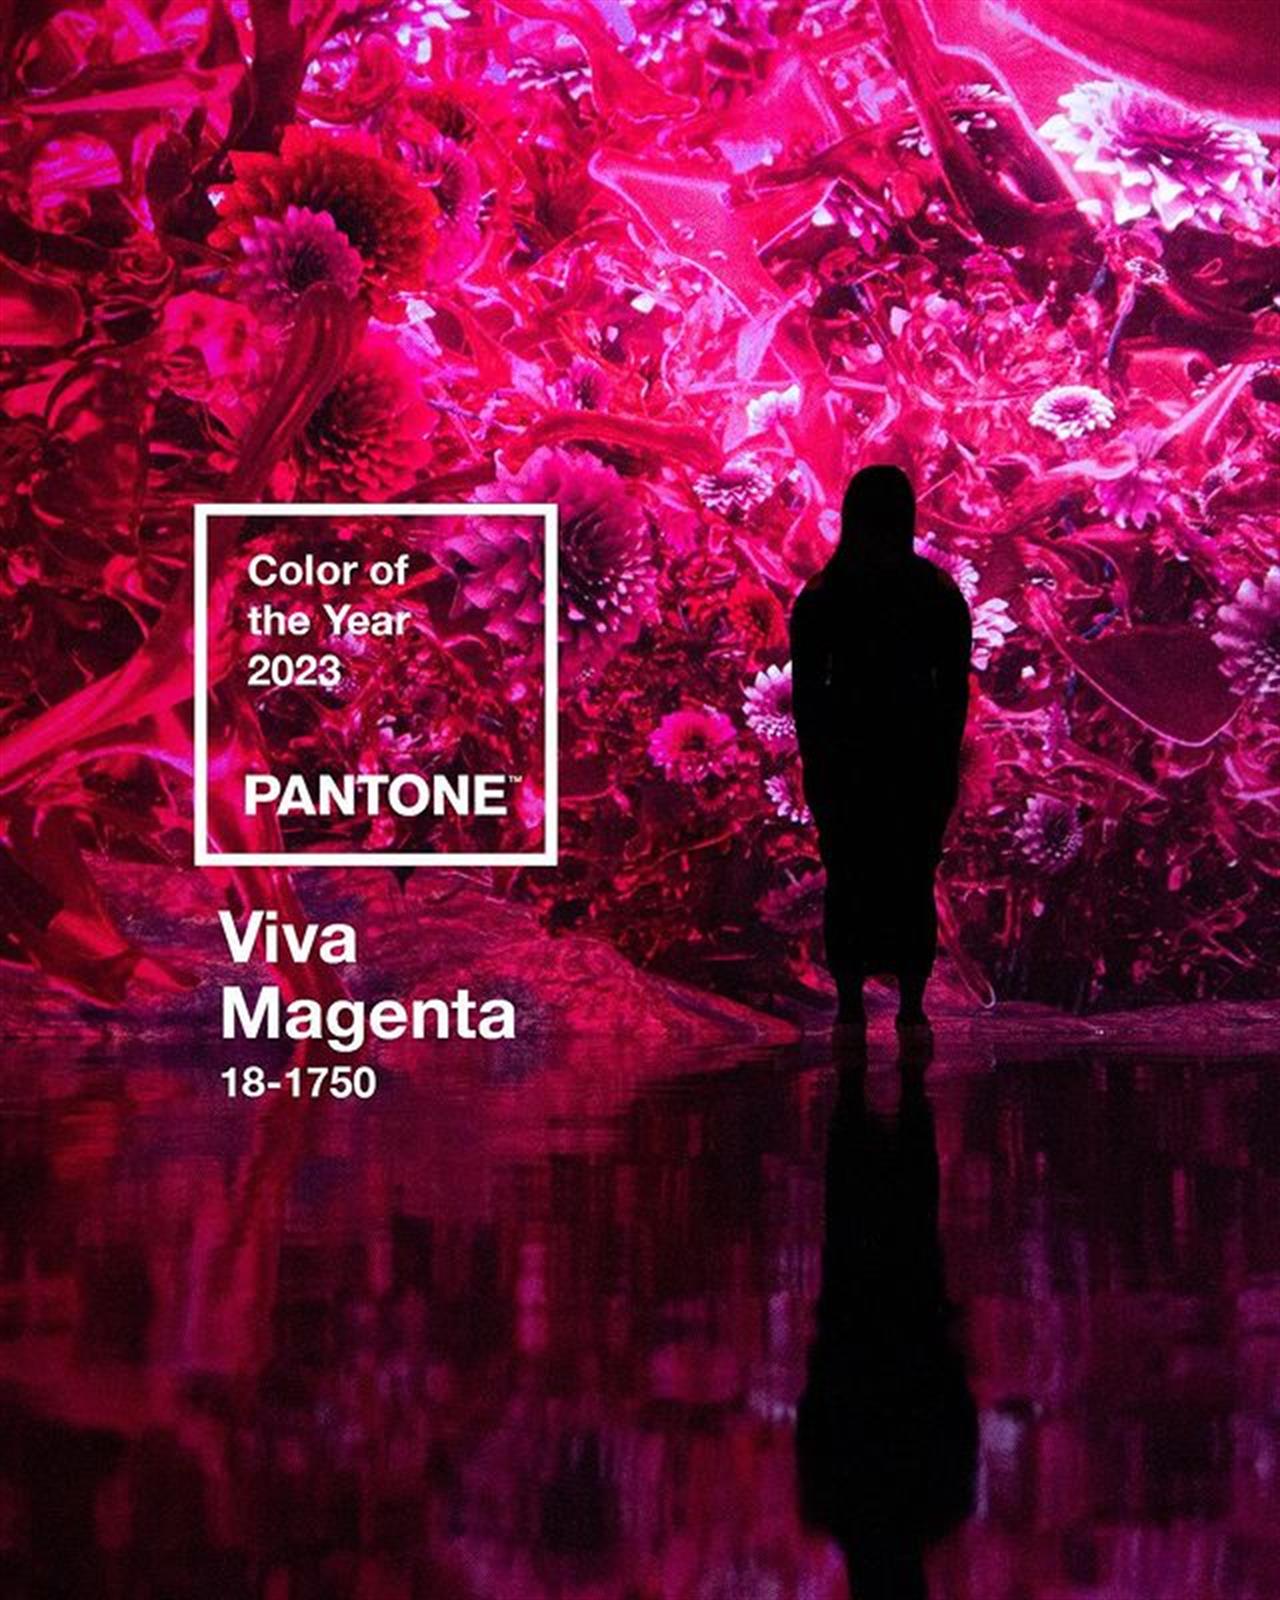 Pantone's 2023 Color of the Year Is Viva Magenta - The New York Times